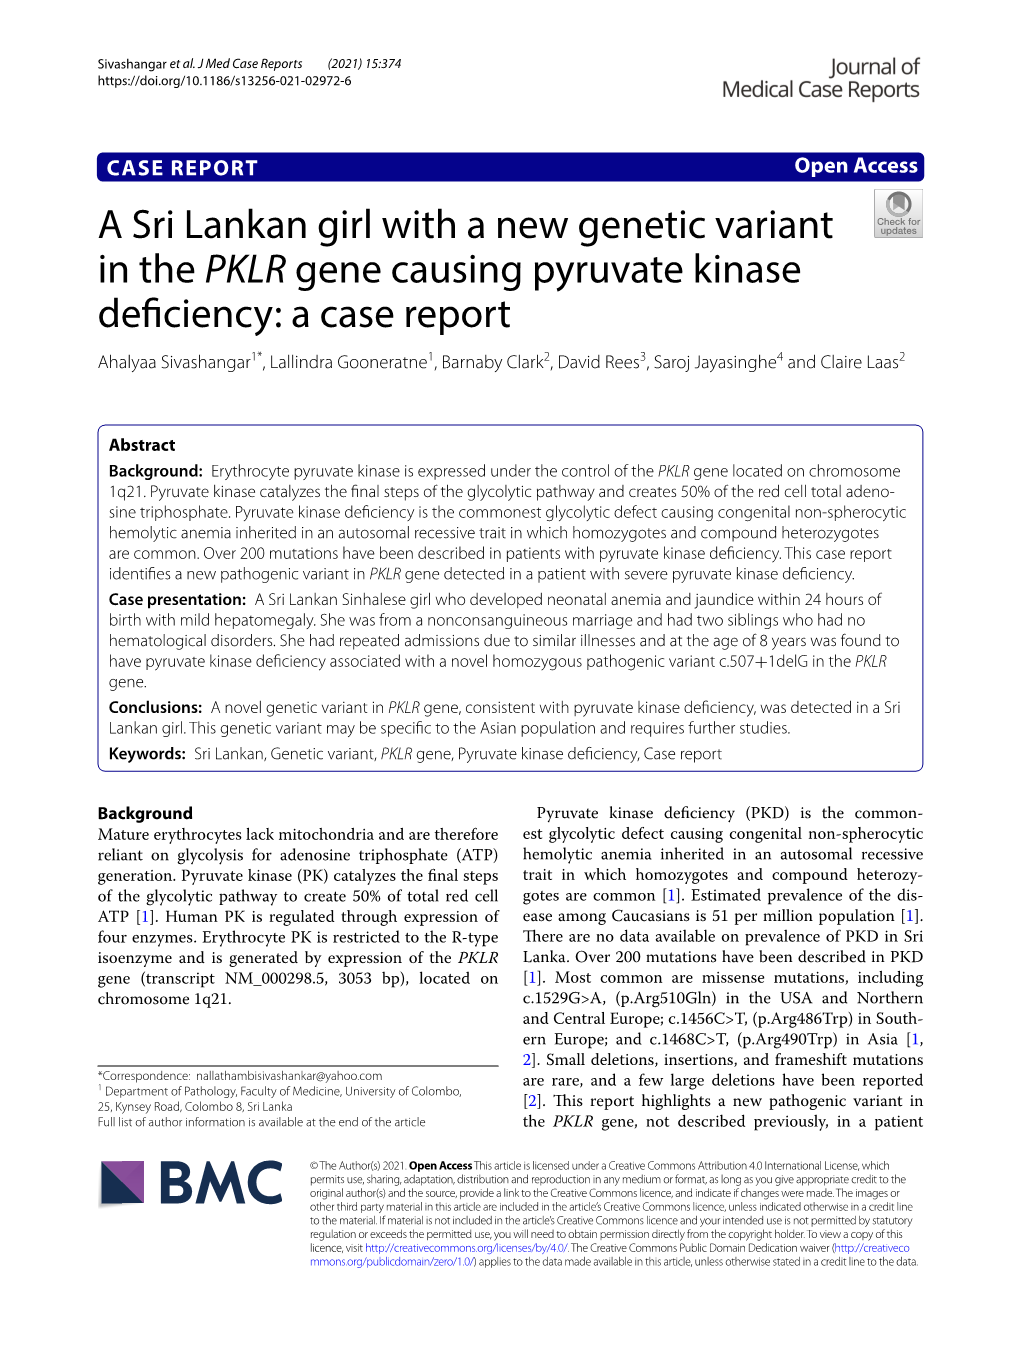 A Sri Lankan Girl with a New Genetic Variant In